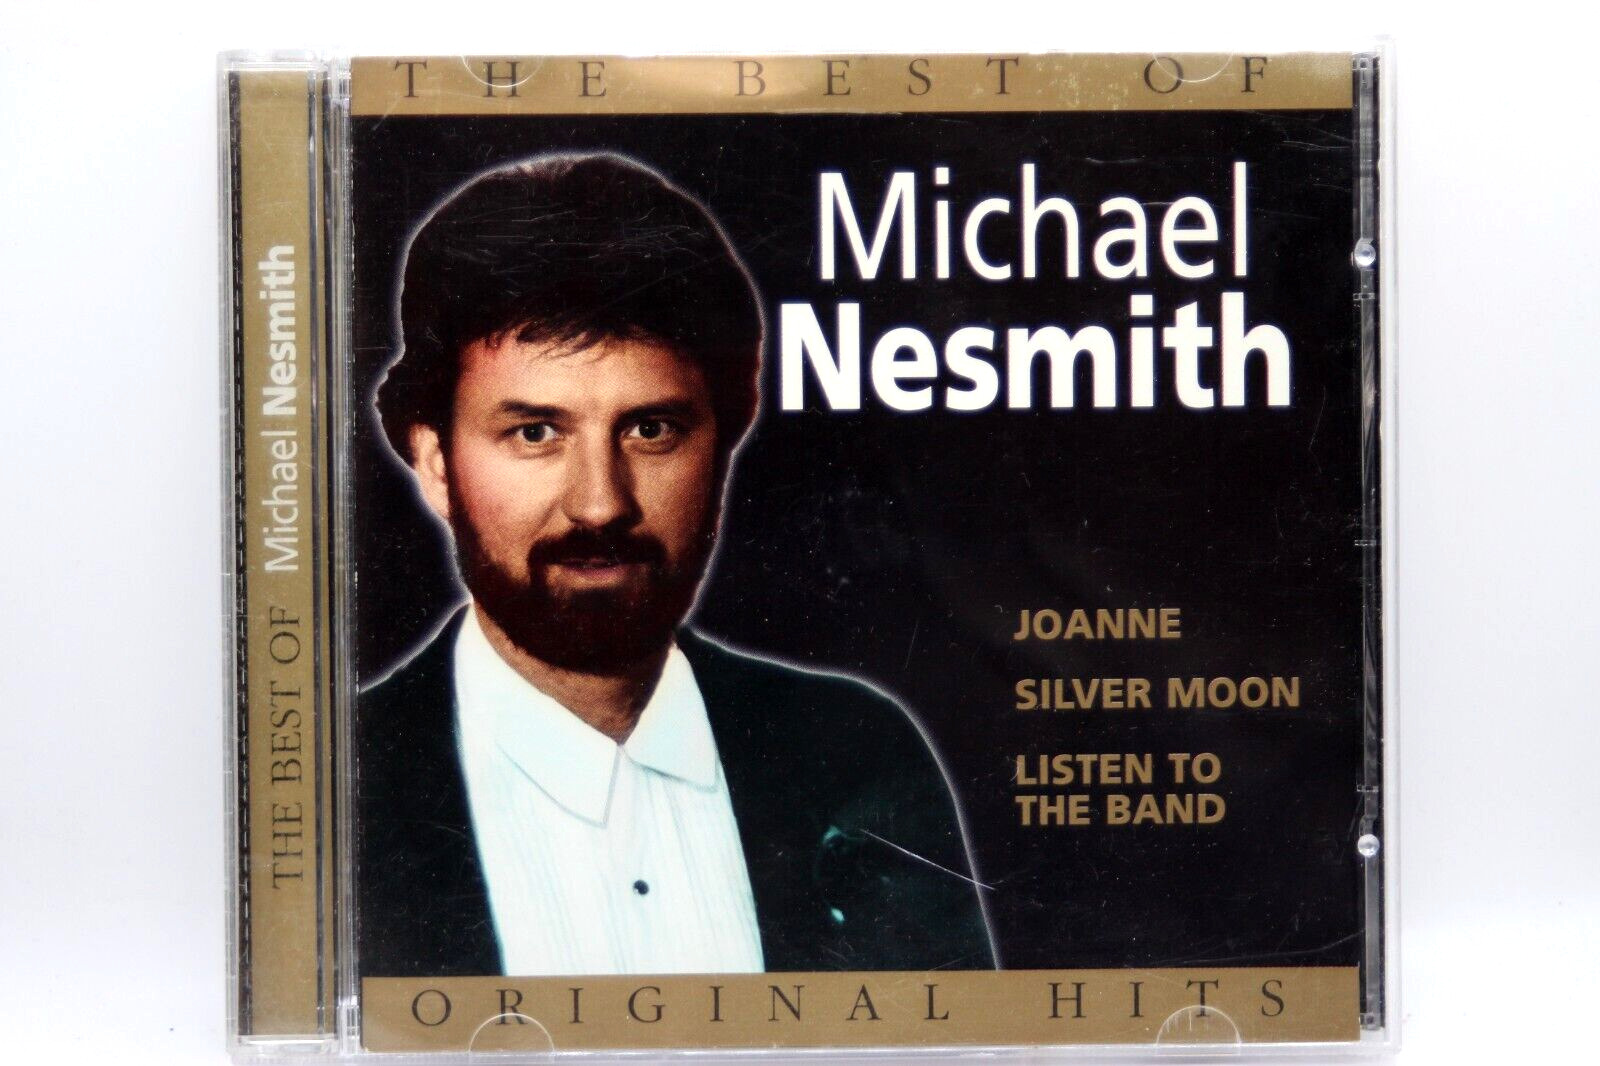 Michael Nesmith – The Best of Michael Nesmith (2001) Paradiso - Gold Colored CD